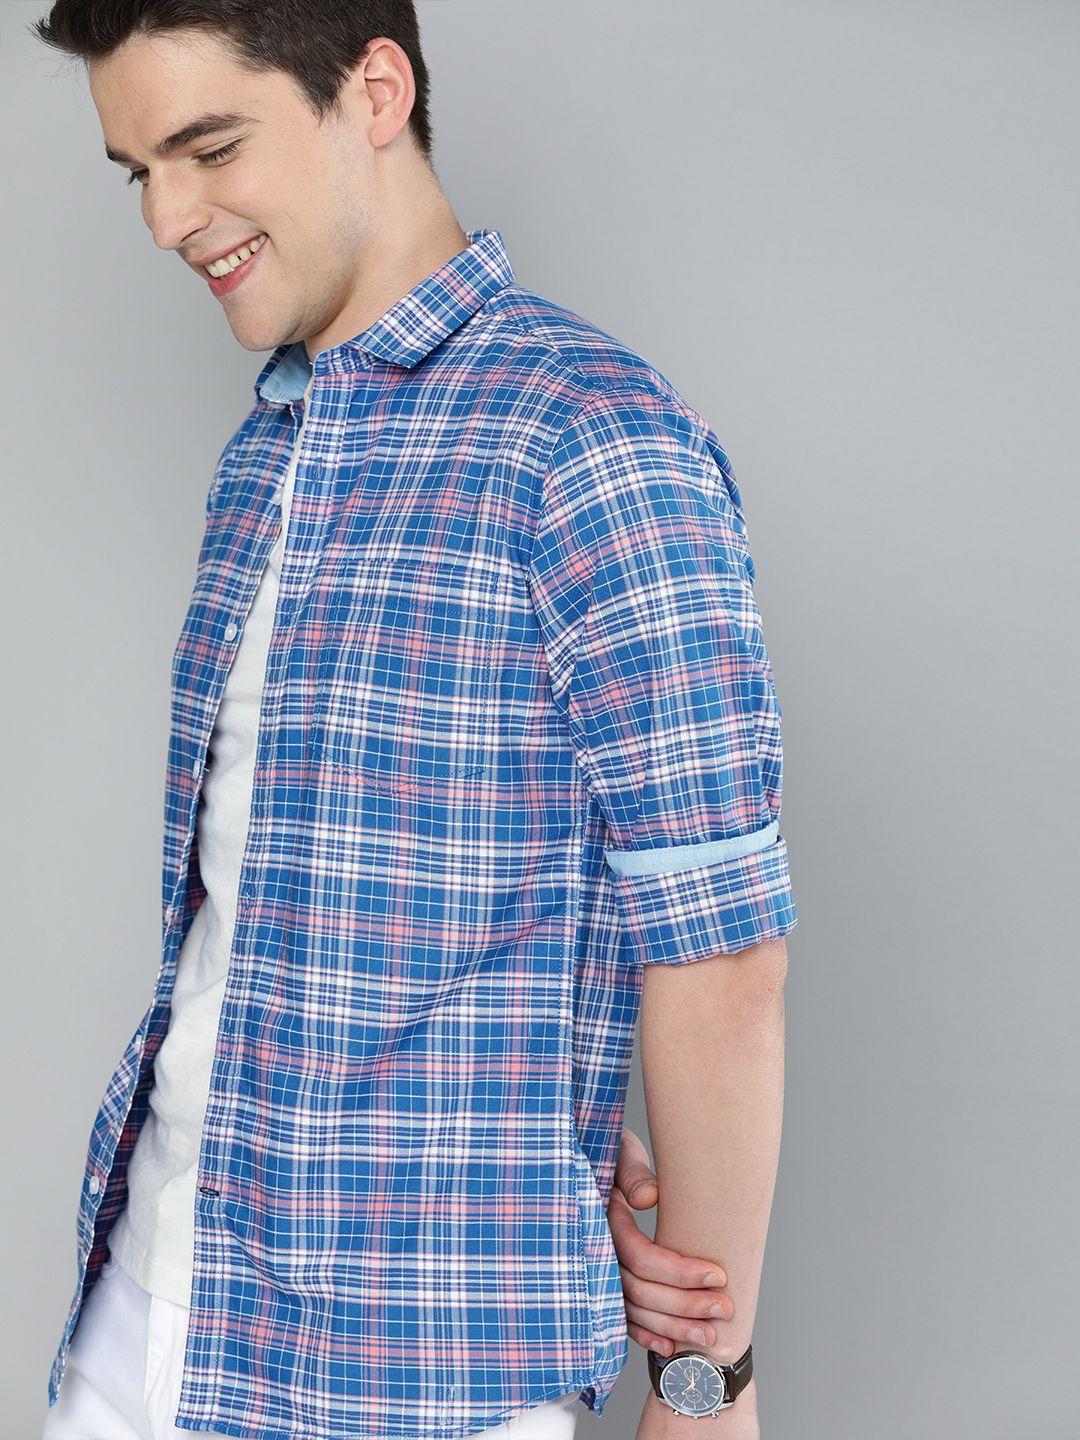 mast-&-harbour-men-blue-&-white-regular-fit-checked-casual-sustainable-shirt